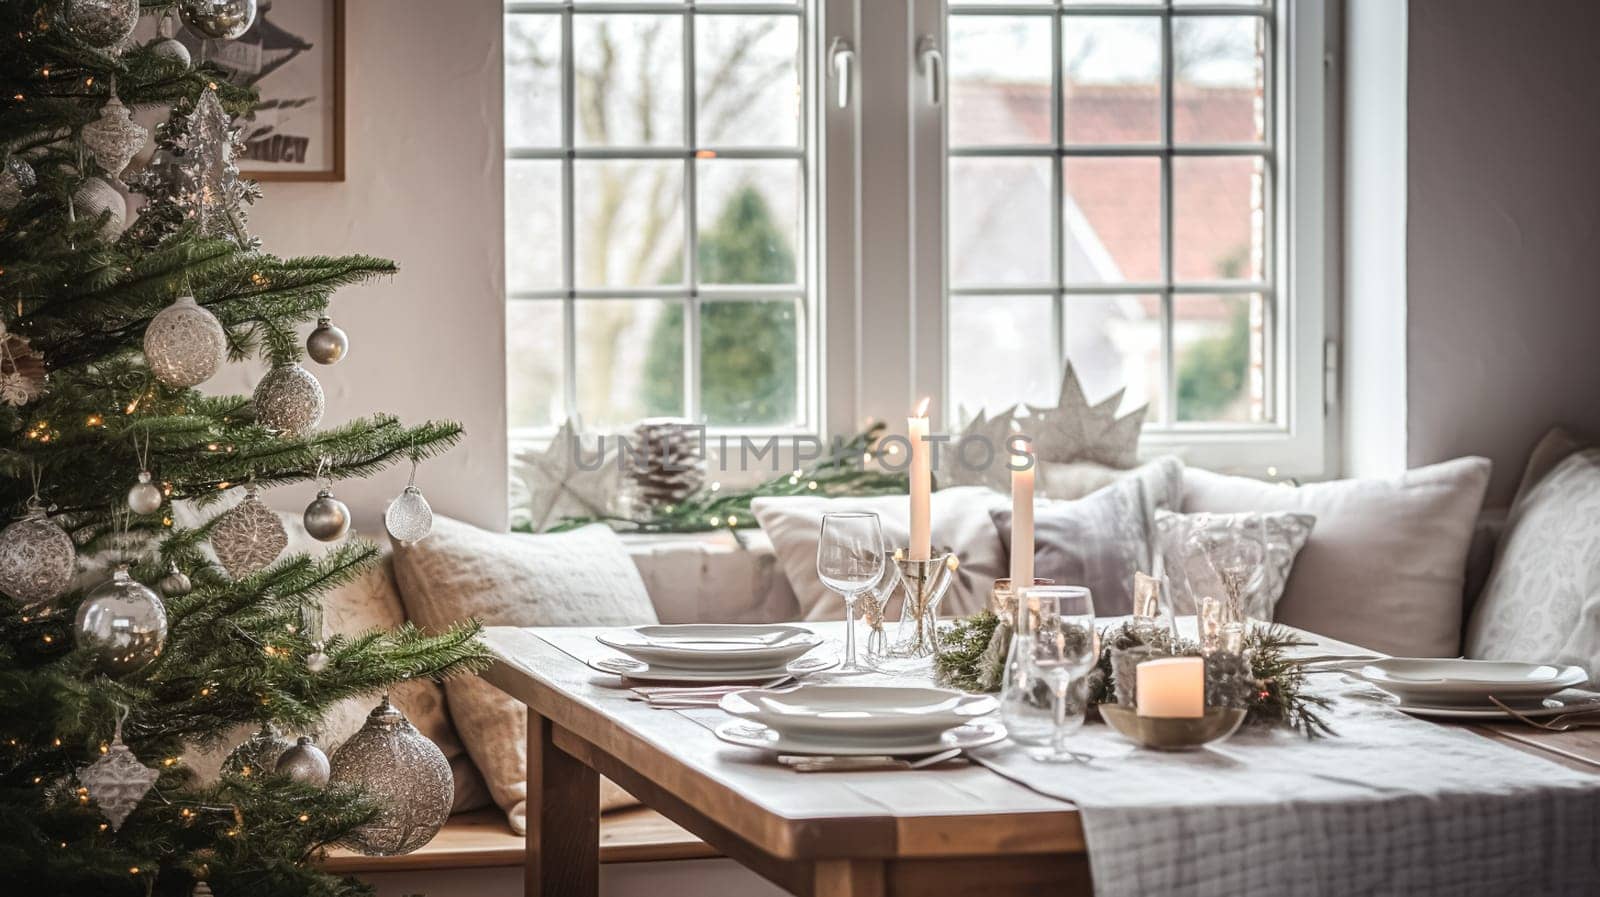 Christmas holiday family breakfast, table setting decor and festive tablescape, English country and home styling inspiration